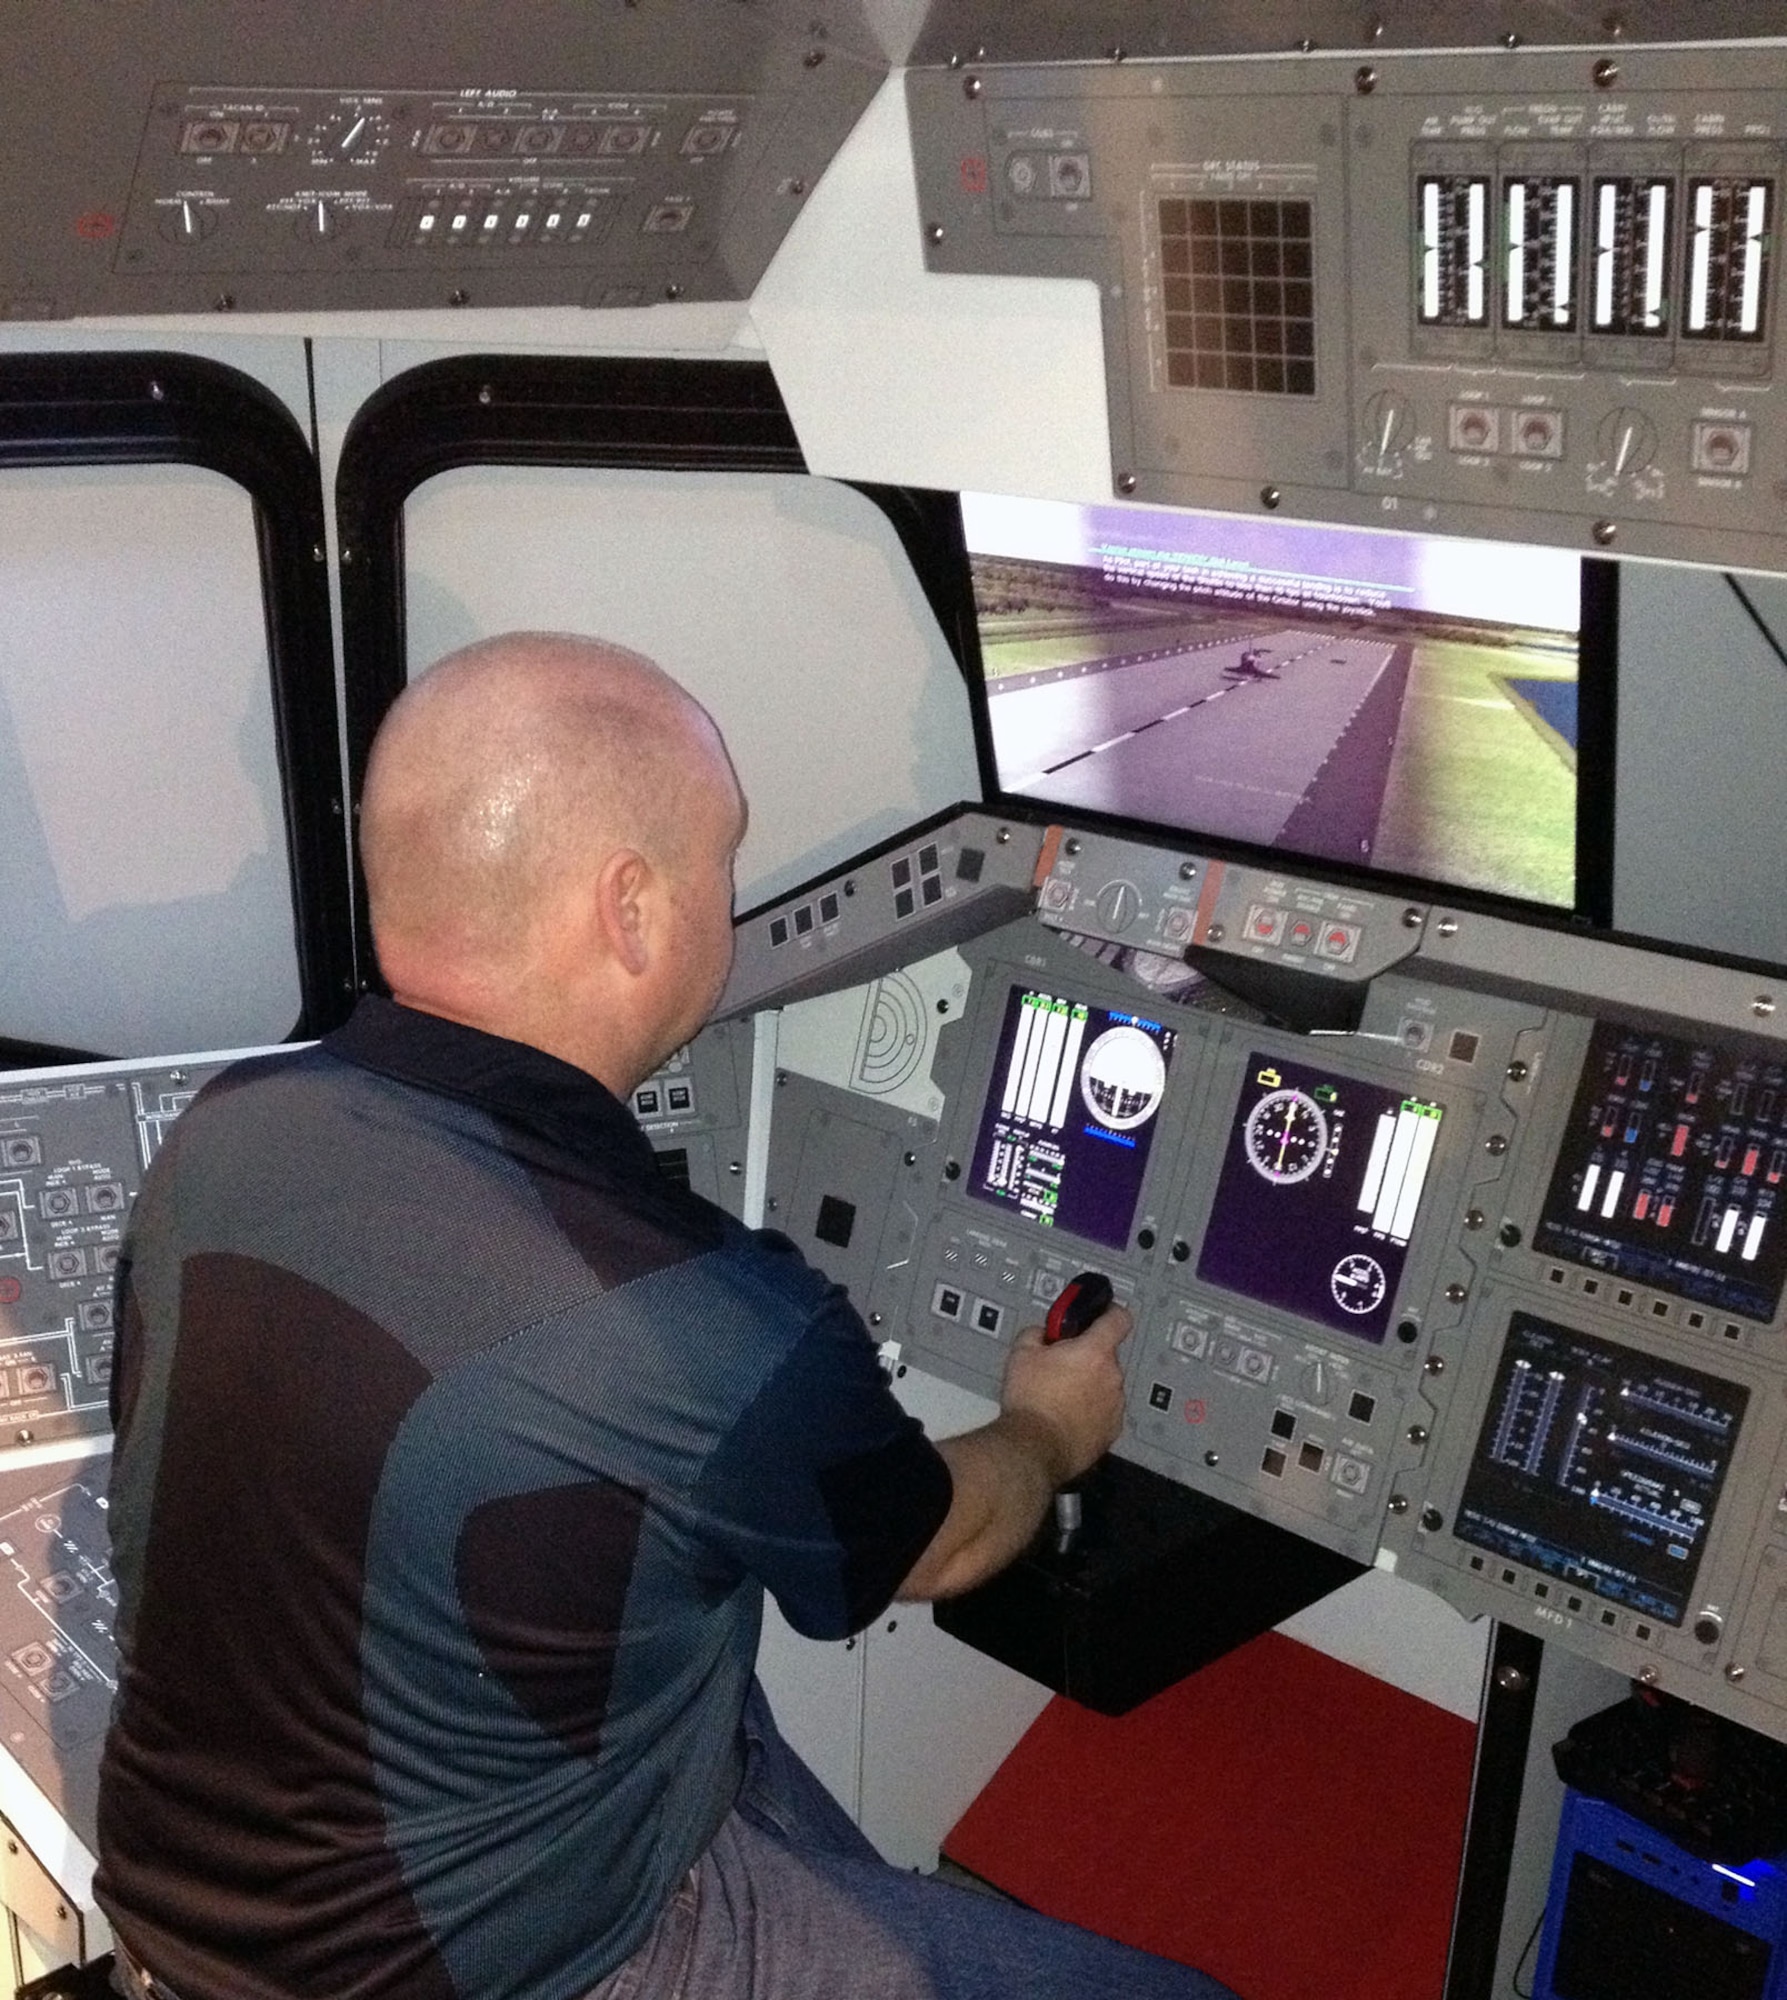 DAYTON, Ohio -- National Museum of the U.S. Air Force visitors can now test their skill at landing a space shuttle orbiter with the addition of two new interactive space shuttle landing simulators. The simulators are free of charge and allow visitors to “fly” the shuttle to a safe landing using a joystick and video screens, and receive feedback on how well they piloted the shuttle.  (U.S. Air Force Photo)